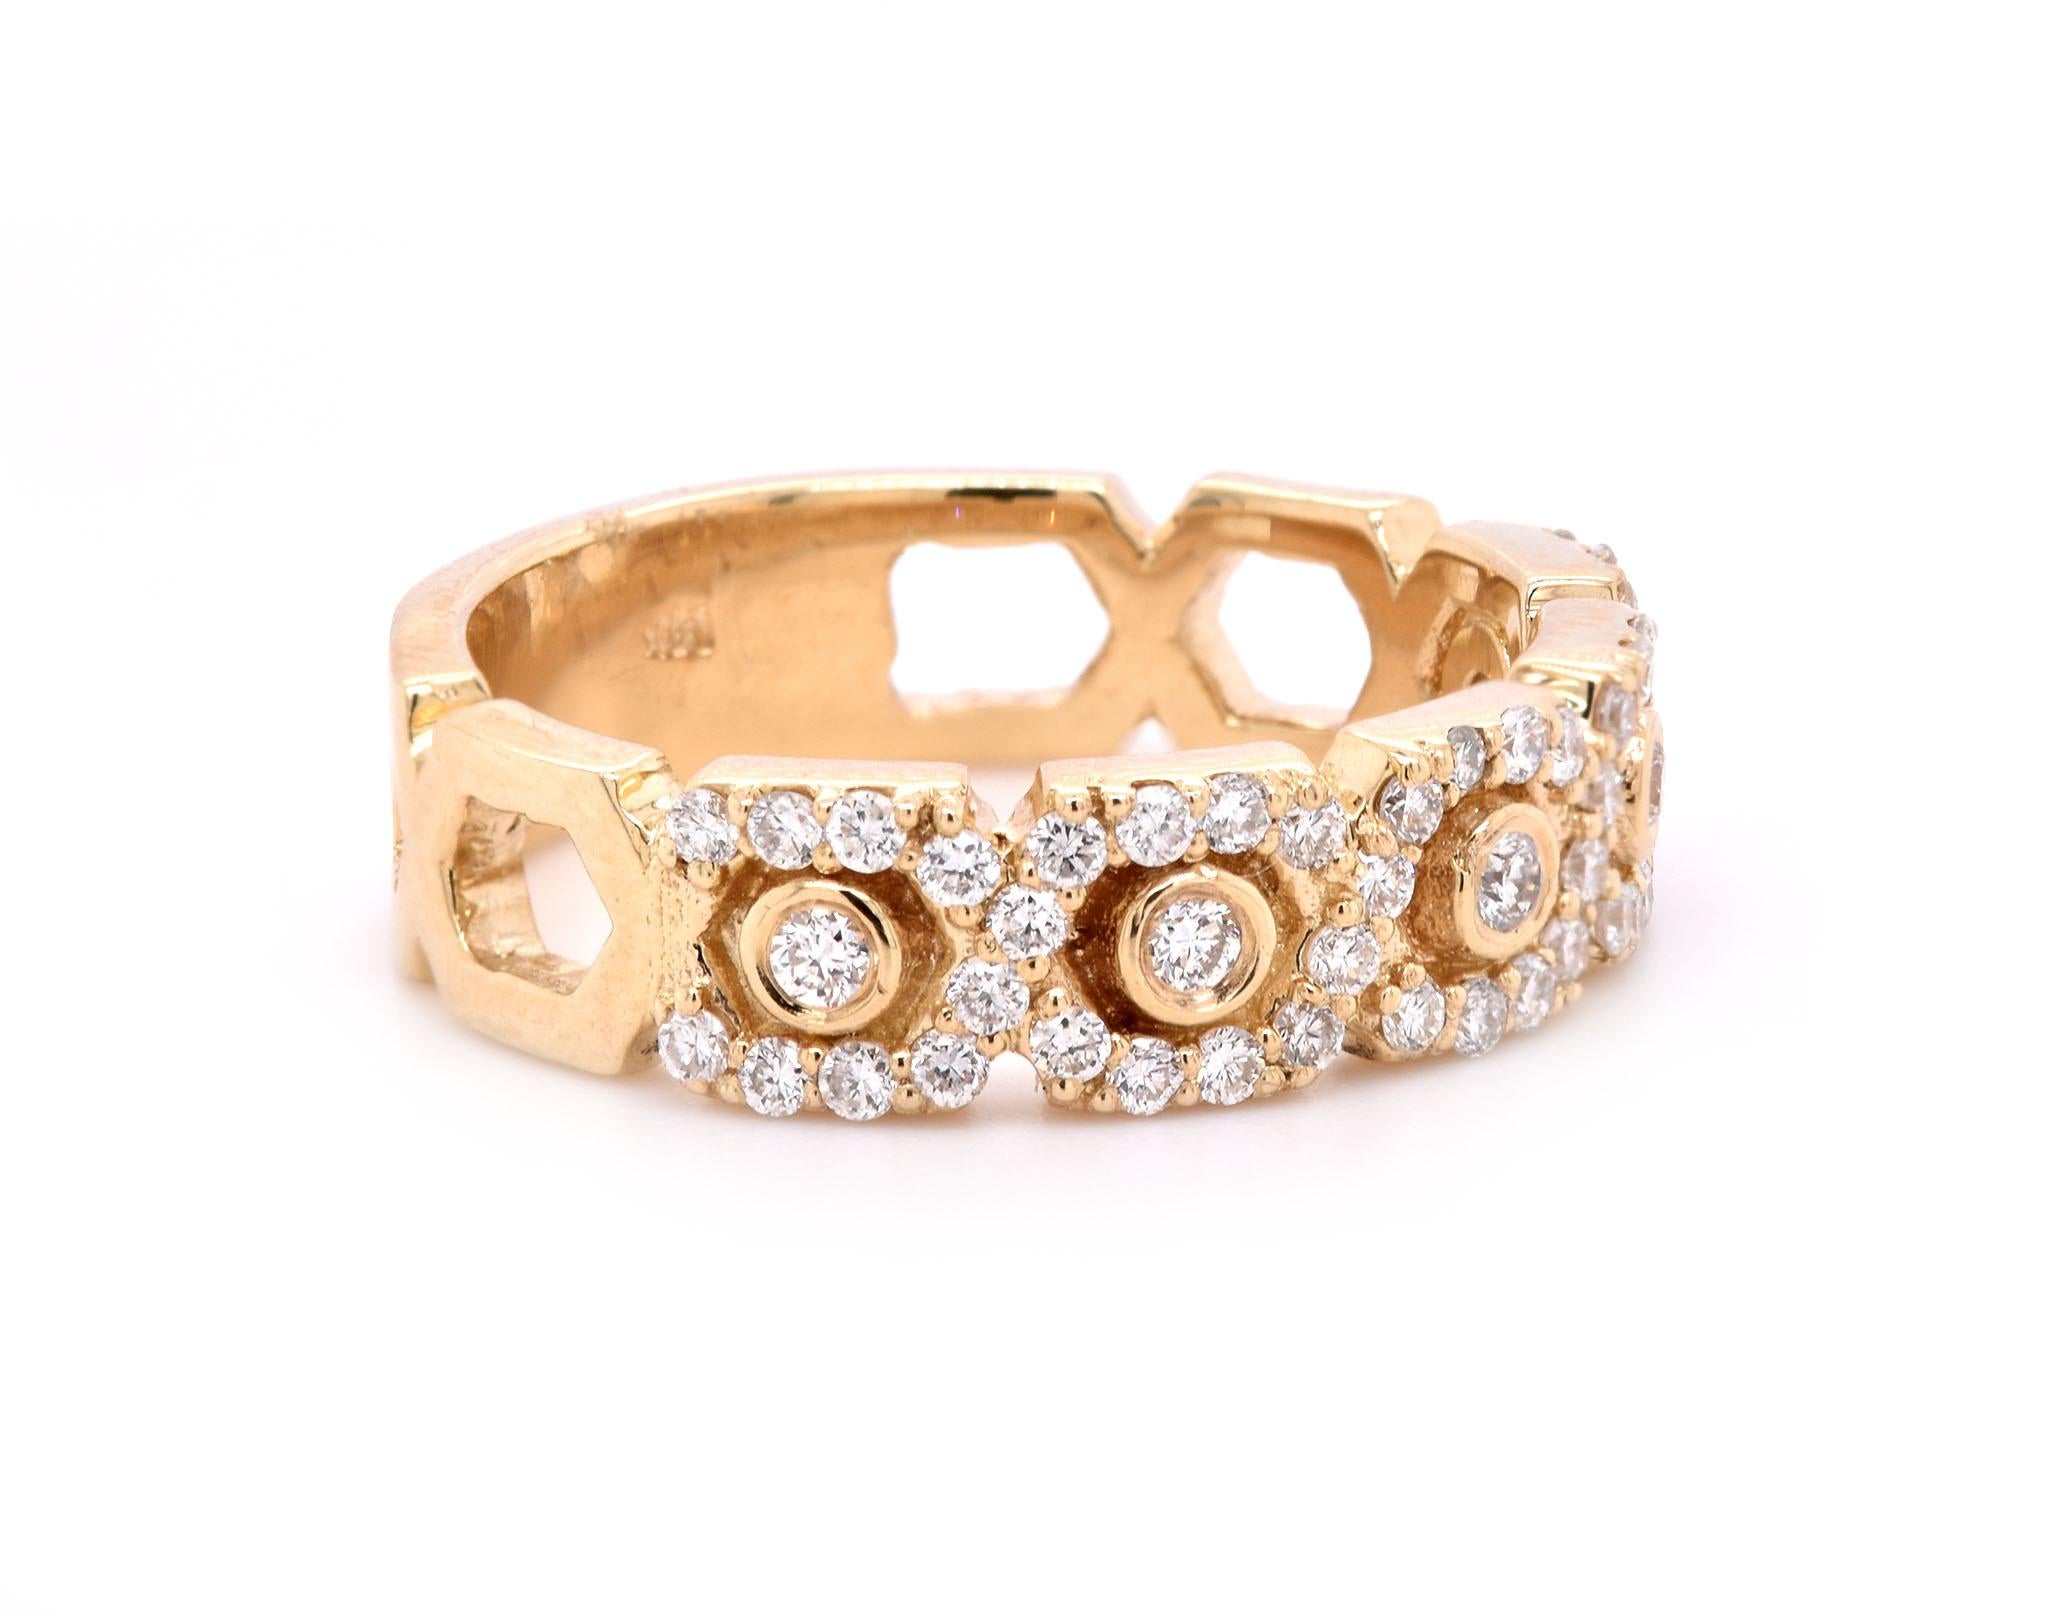 Designer: custom
Material: 14k yellow gold
Diamonds: 45 round brilliant cut = 0.50cttw
Color: G
Clarity: VS
Size: 7 (please allow two additional shipping days for sizing requests)  
Dimensions: ring measures 5.5mm in width
Weight: 5.03 grams